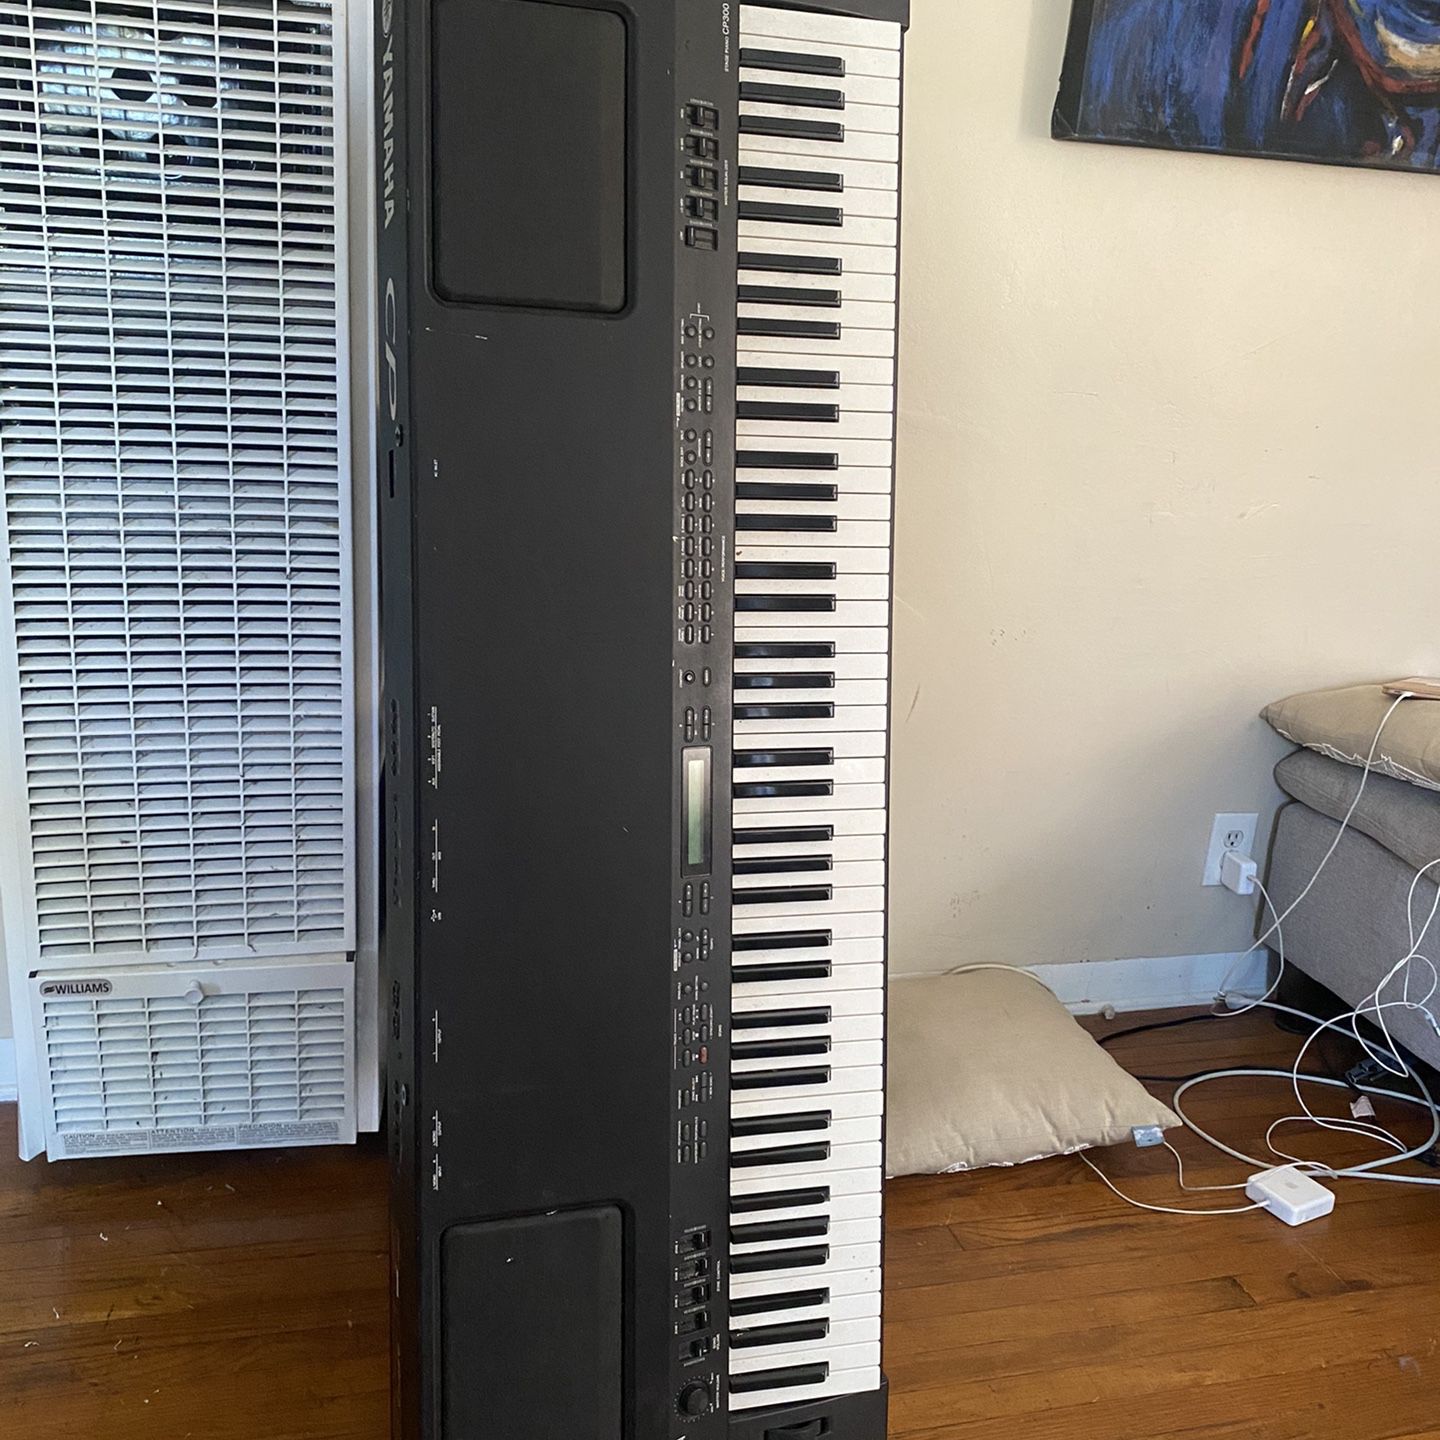 Yamaha CP300 Stage Piano for Sale in CA - OfferUp